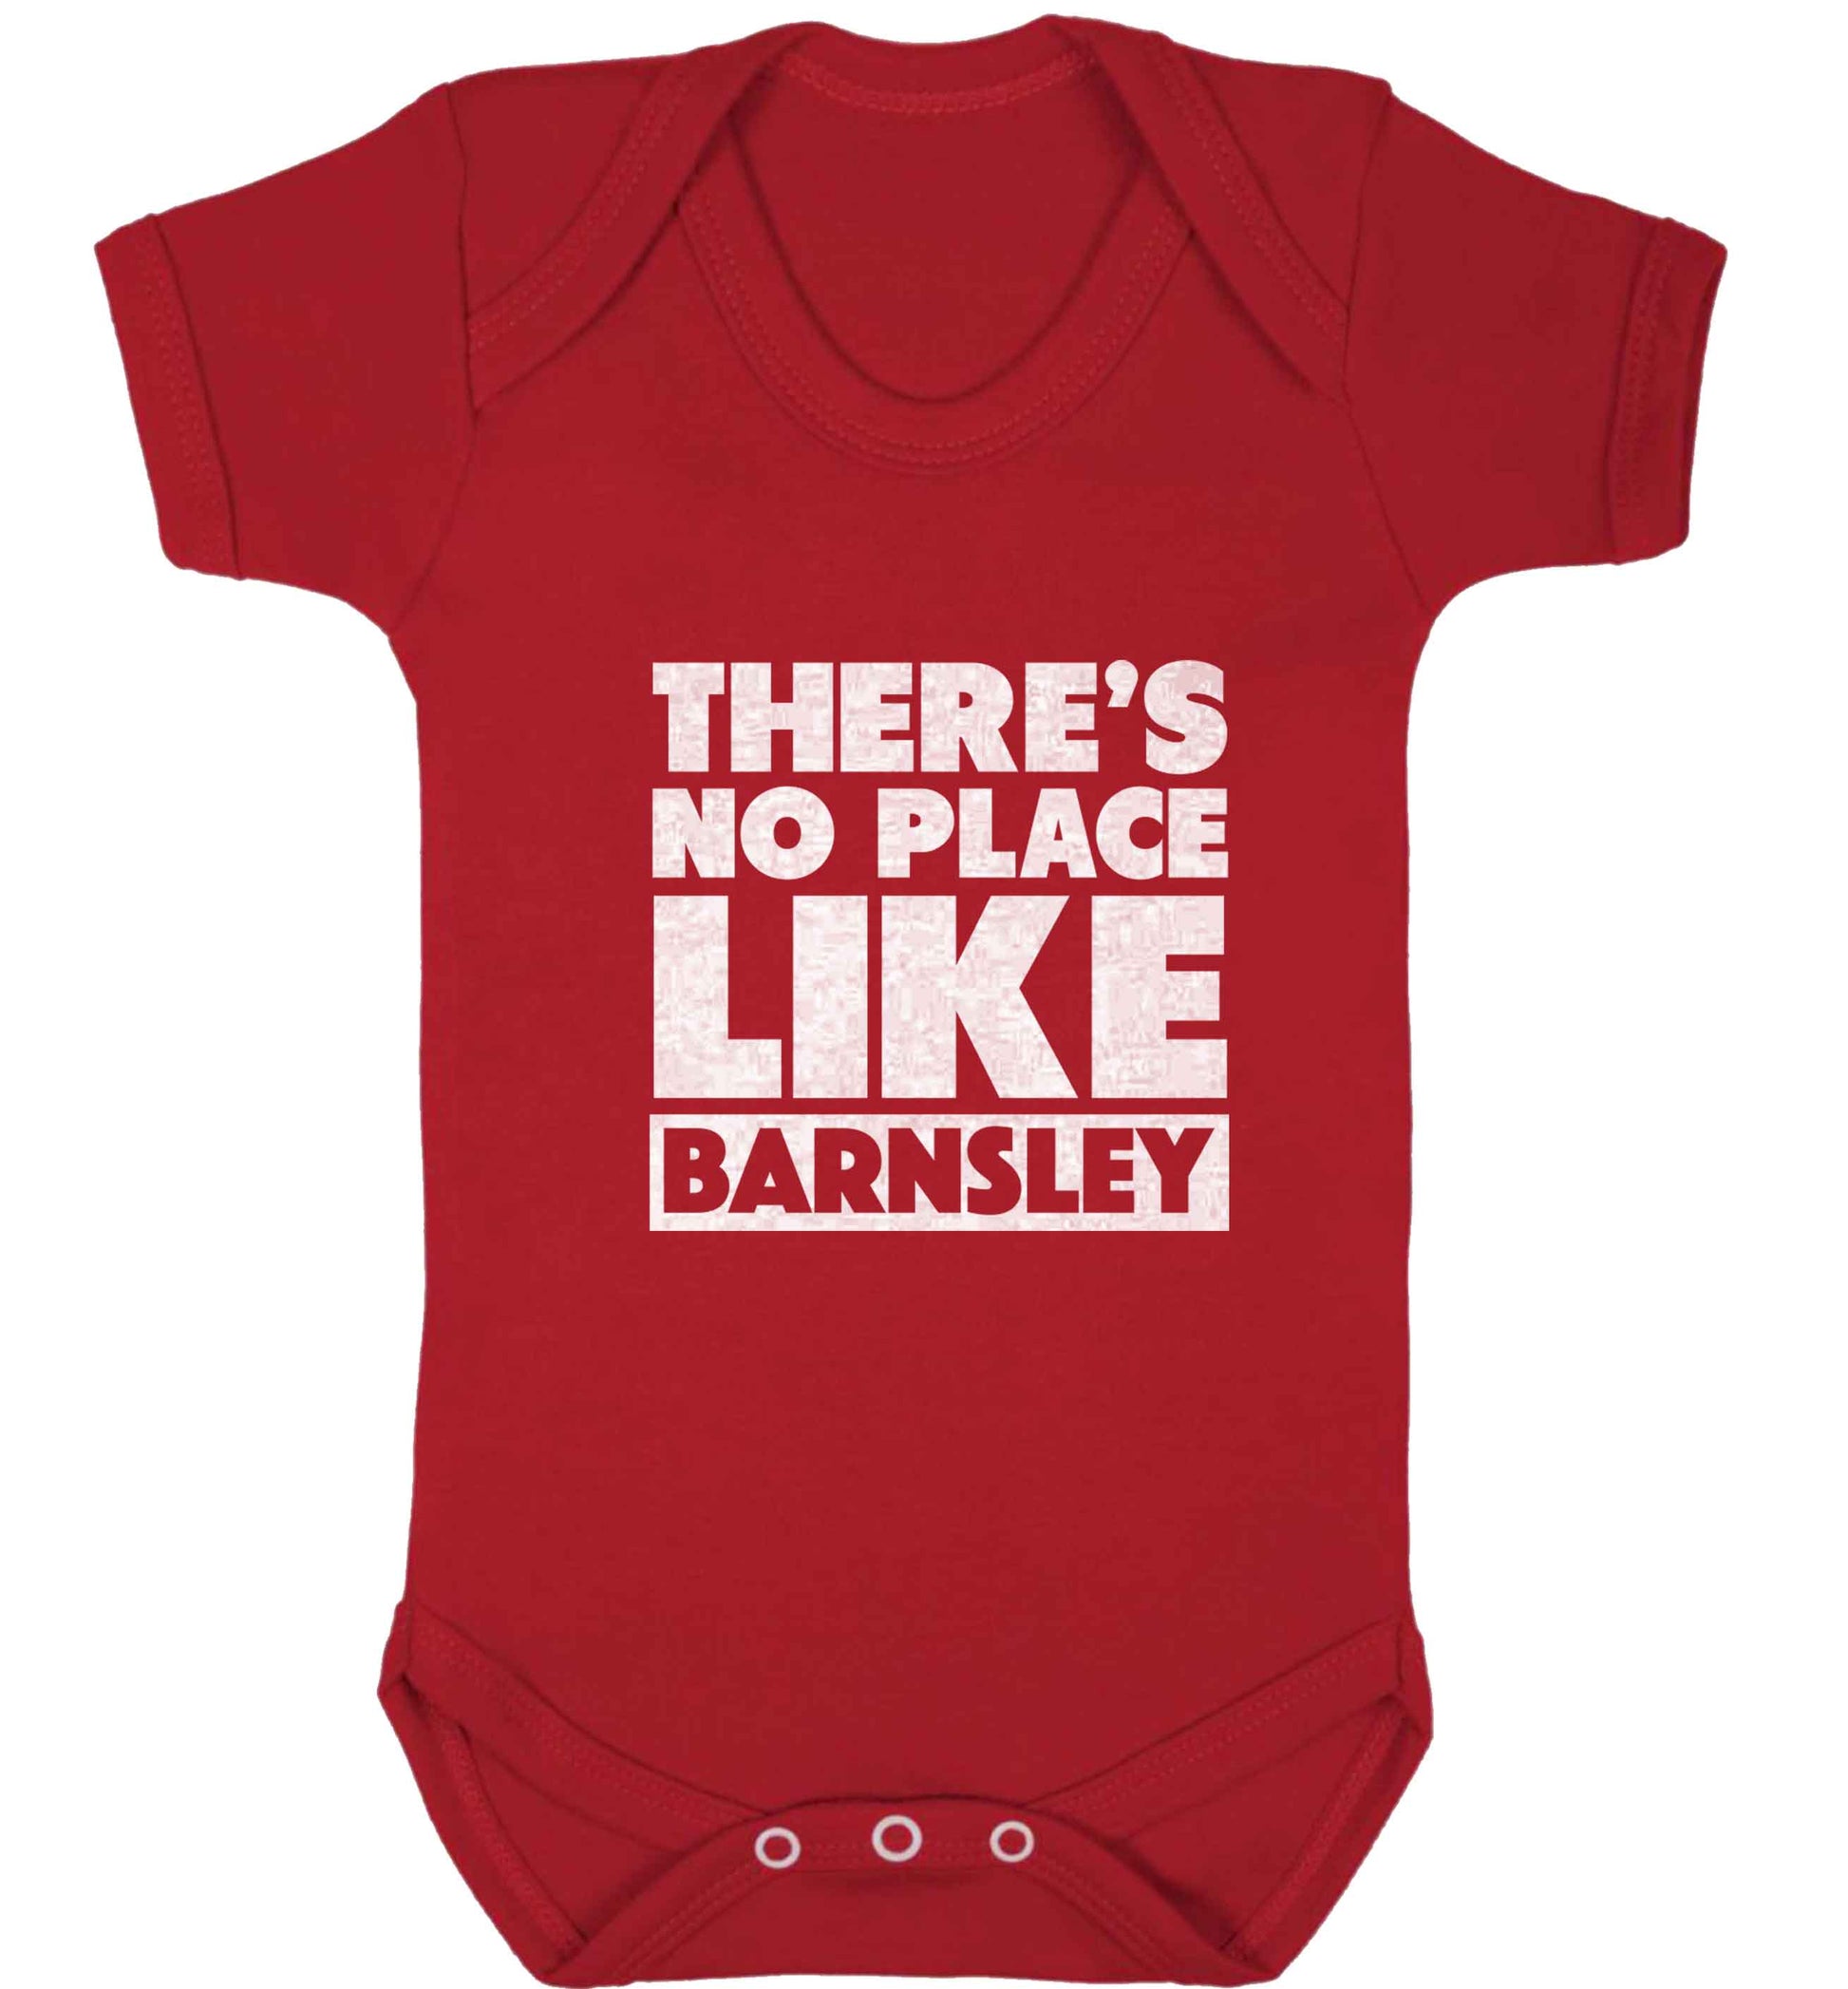 There's No Place Like Barnsley baby vest red 18-24 months